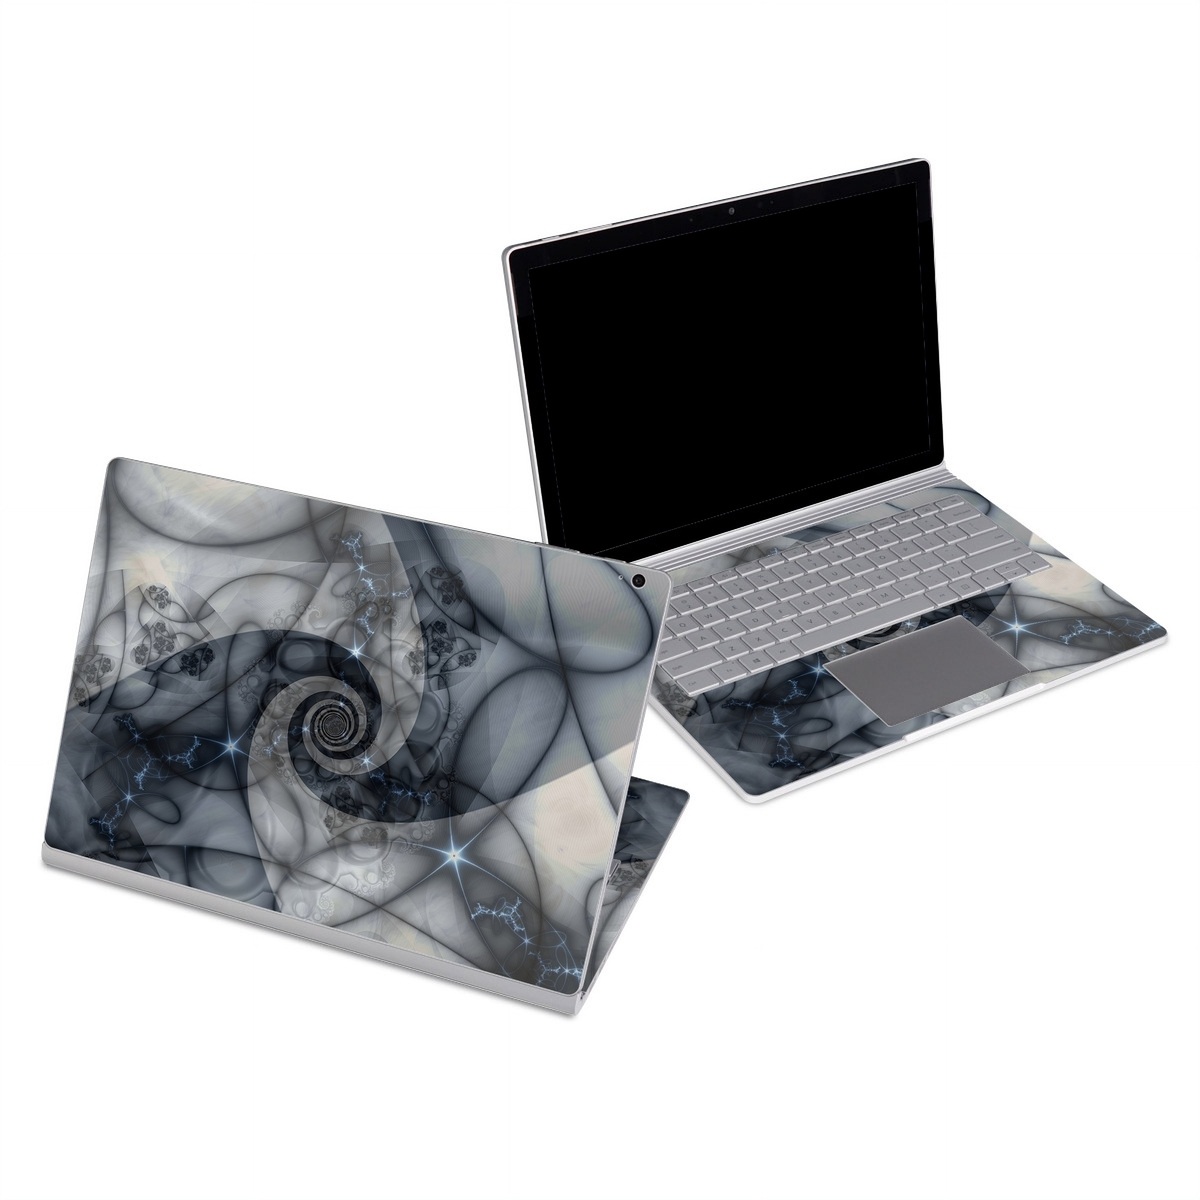 Microsoft Surface Book Series Skin design of Eye, Drawing, Black-and-white, Design, Pattern, Art, Tattoo, Illustration, Fractal art, with black, gray colors